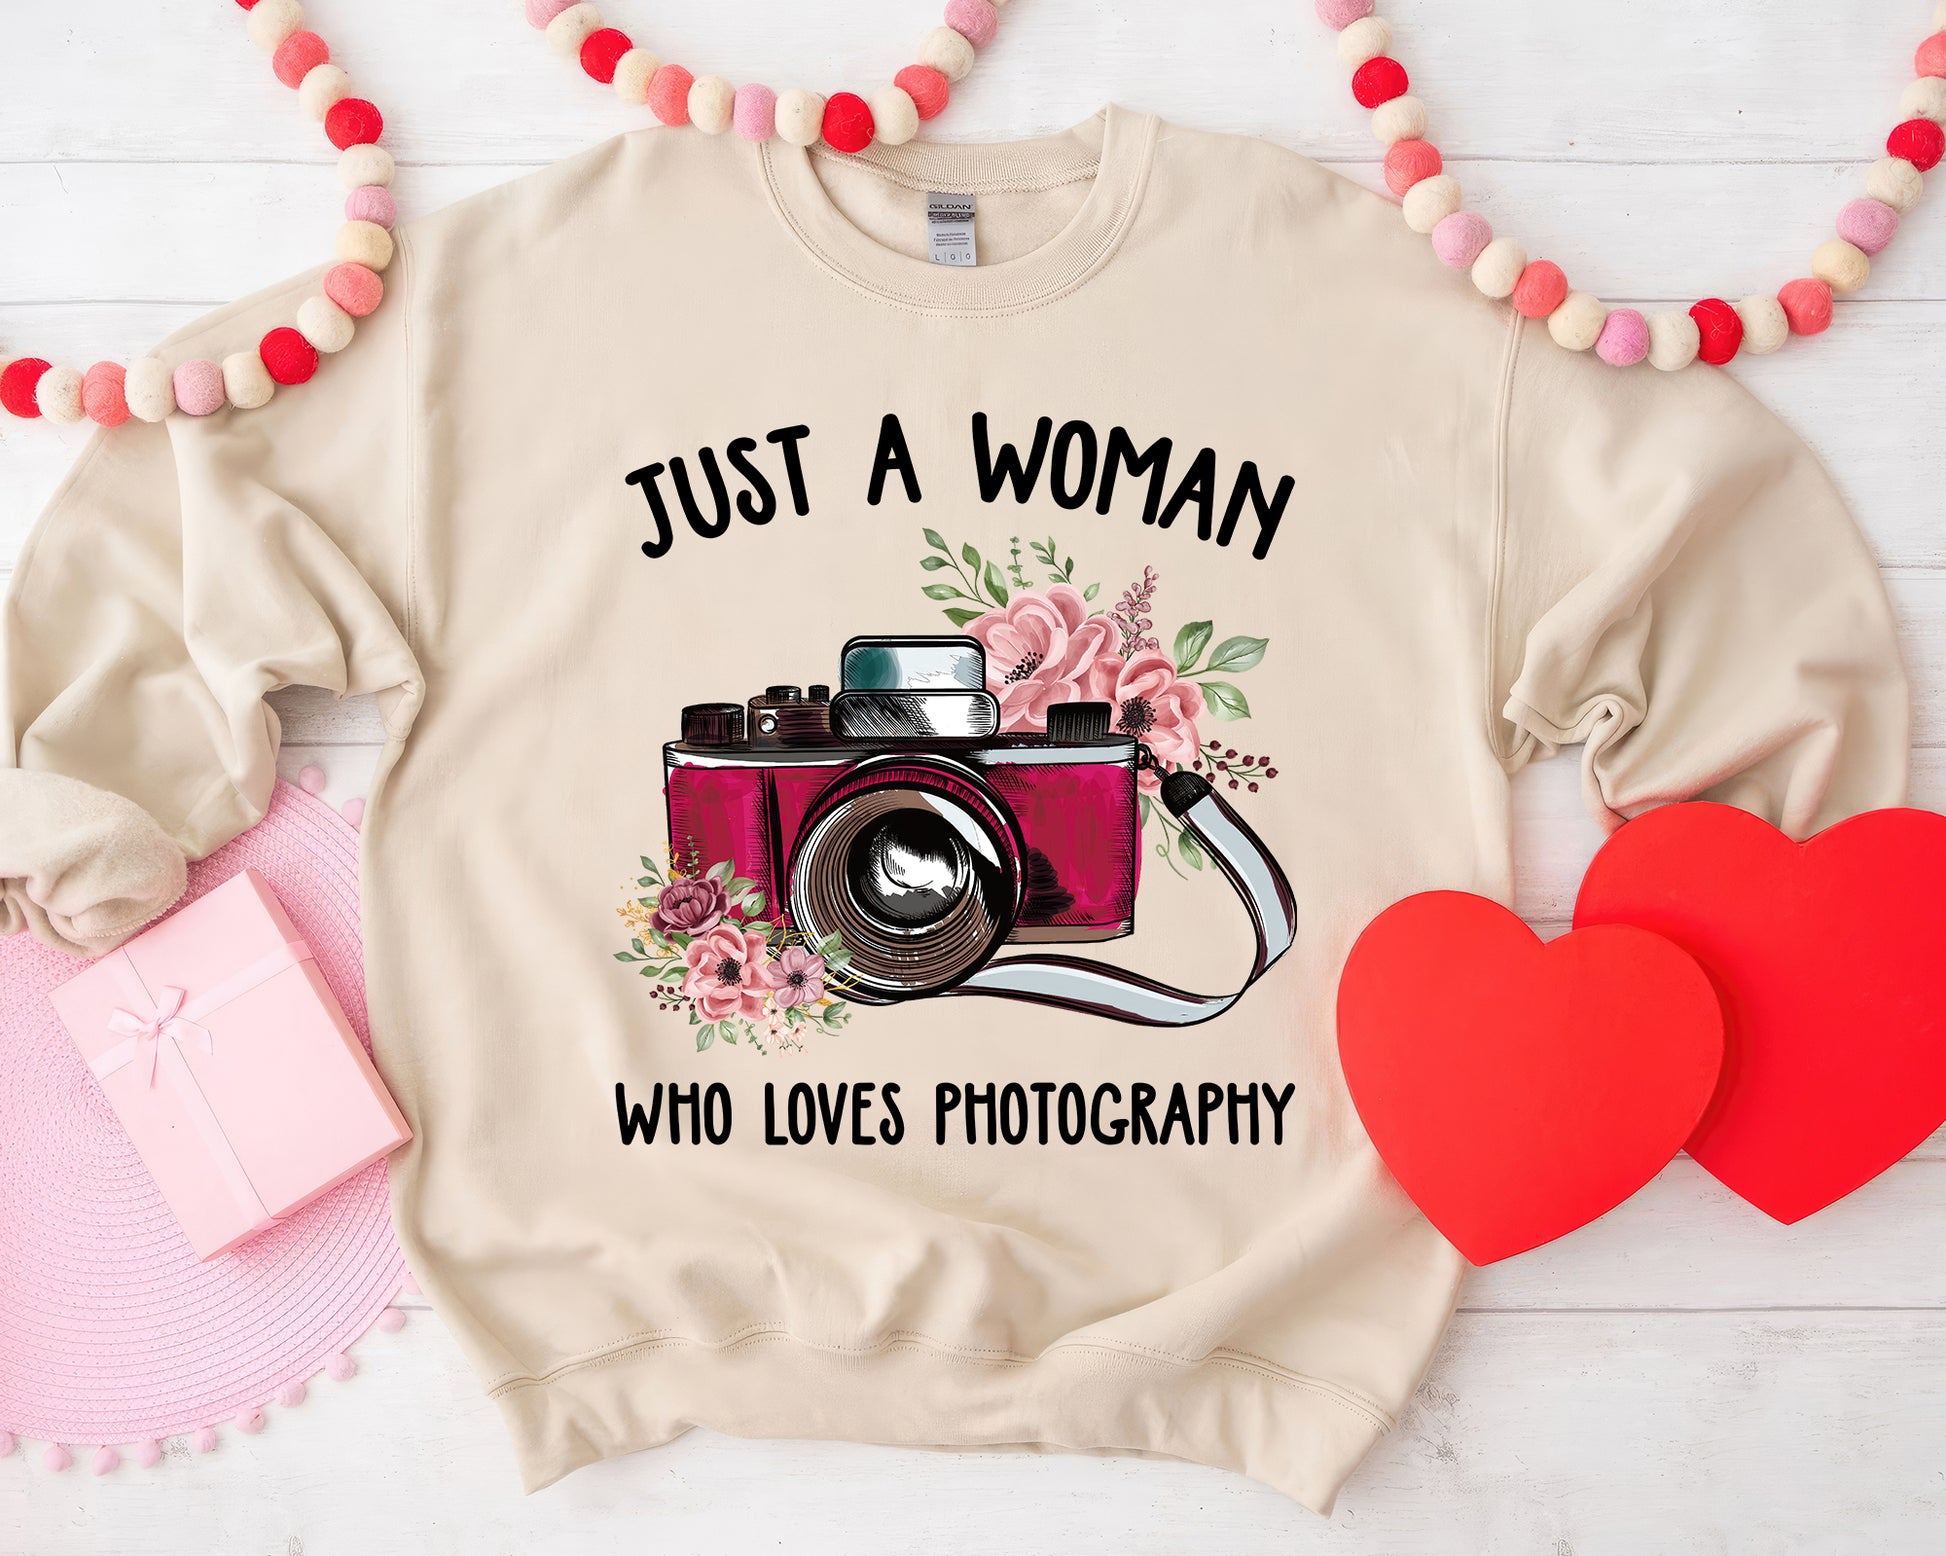 Tee Art Online - Just A Woman Who Loves Photography Sweatshirt | Typography Boho Watercolor Floral Cute Photography Girl Design | Floral Bohemian Hippie - beige